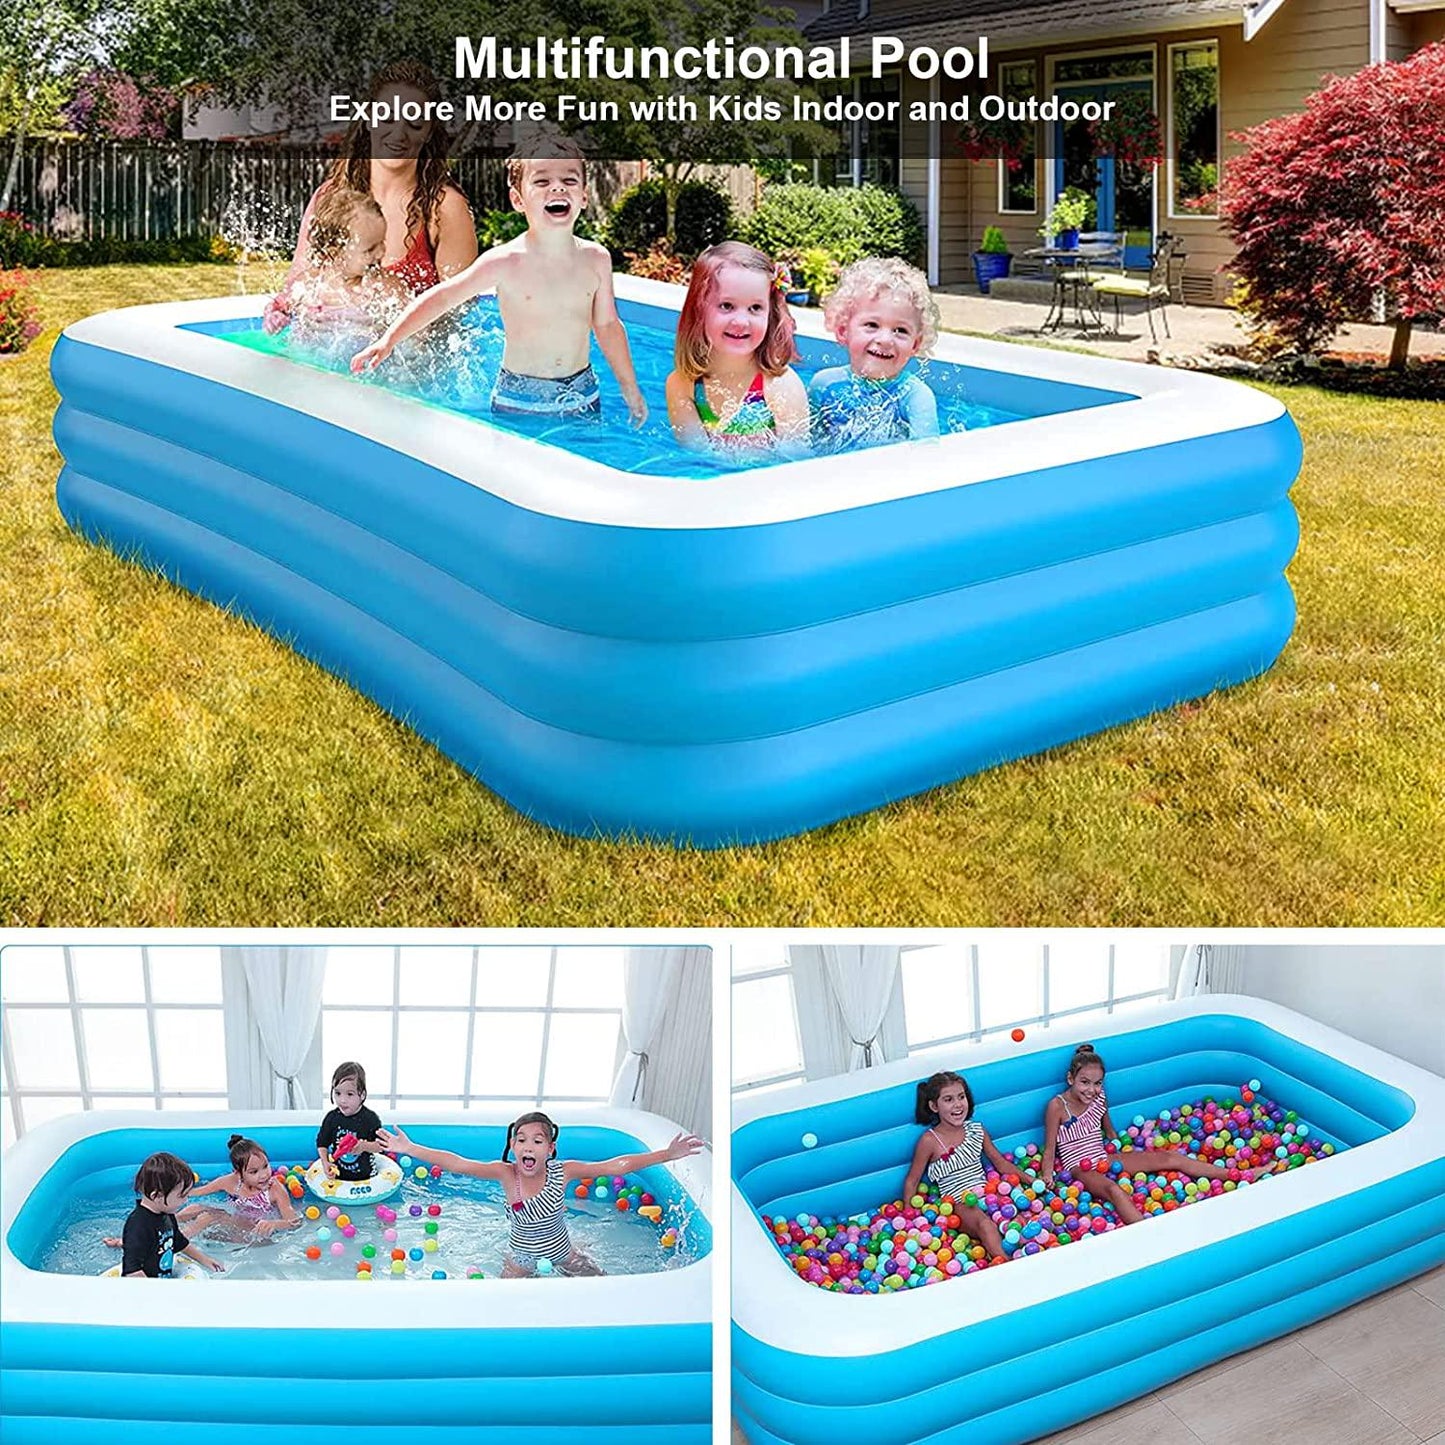 Inflatable Swimming Pool- 120 X 72 X 22 Thickened Full-Sized Family Inflatable Pool for Kids and Adults, Outdoors, Backyard, Summer Water Party